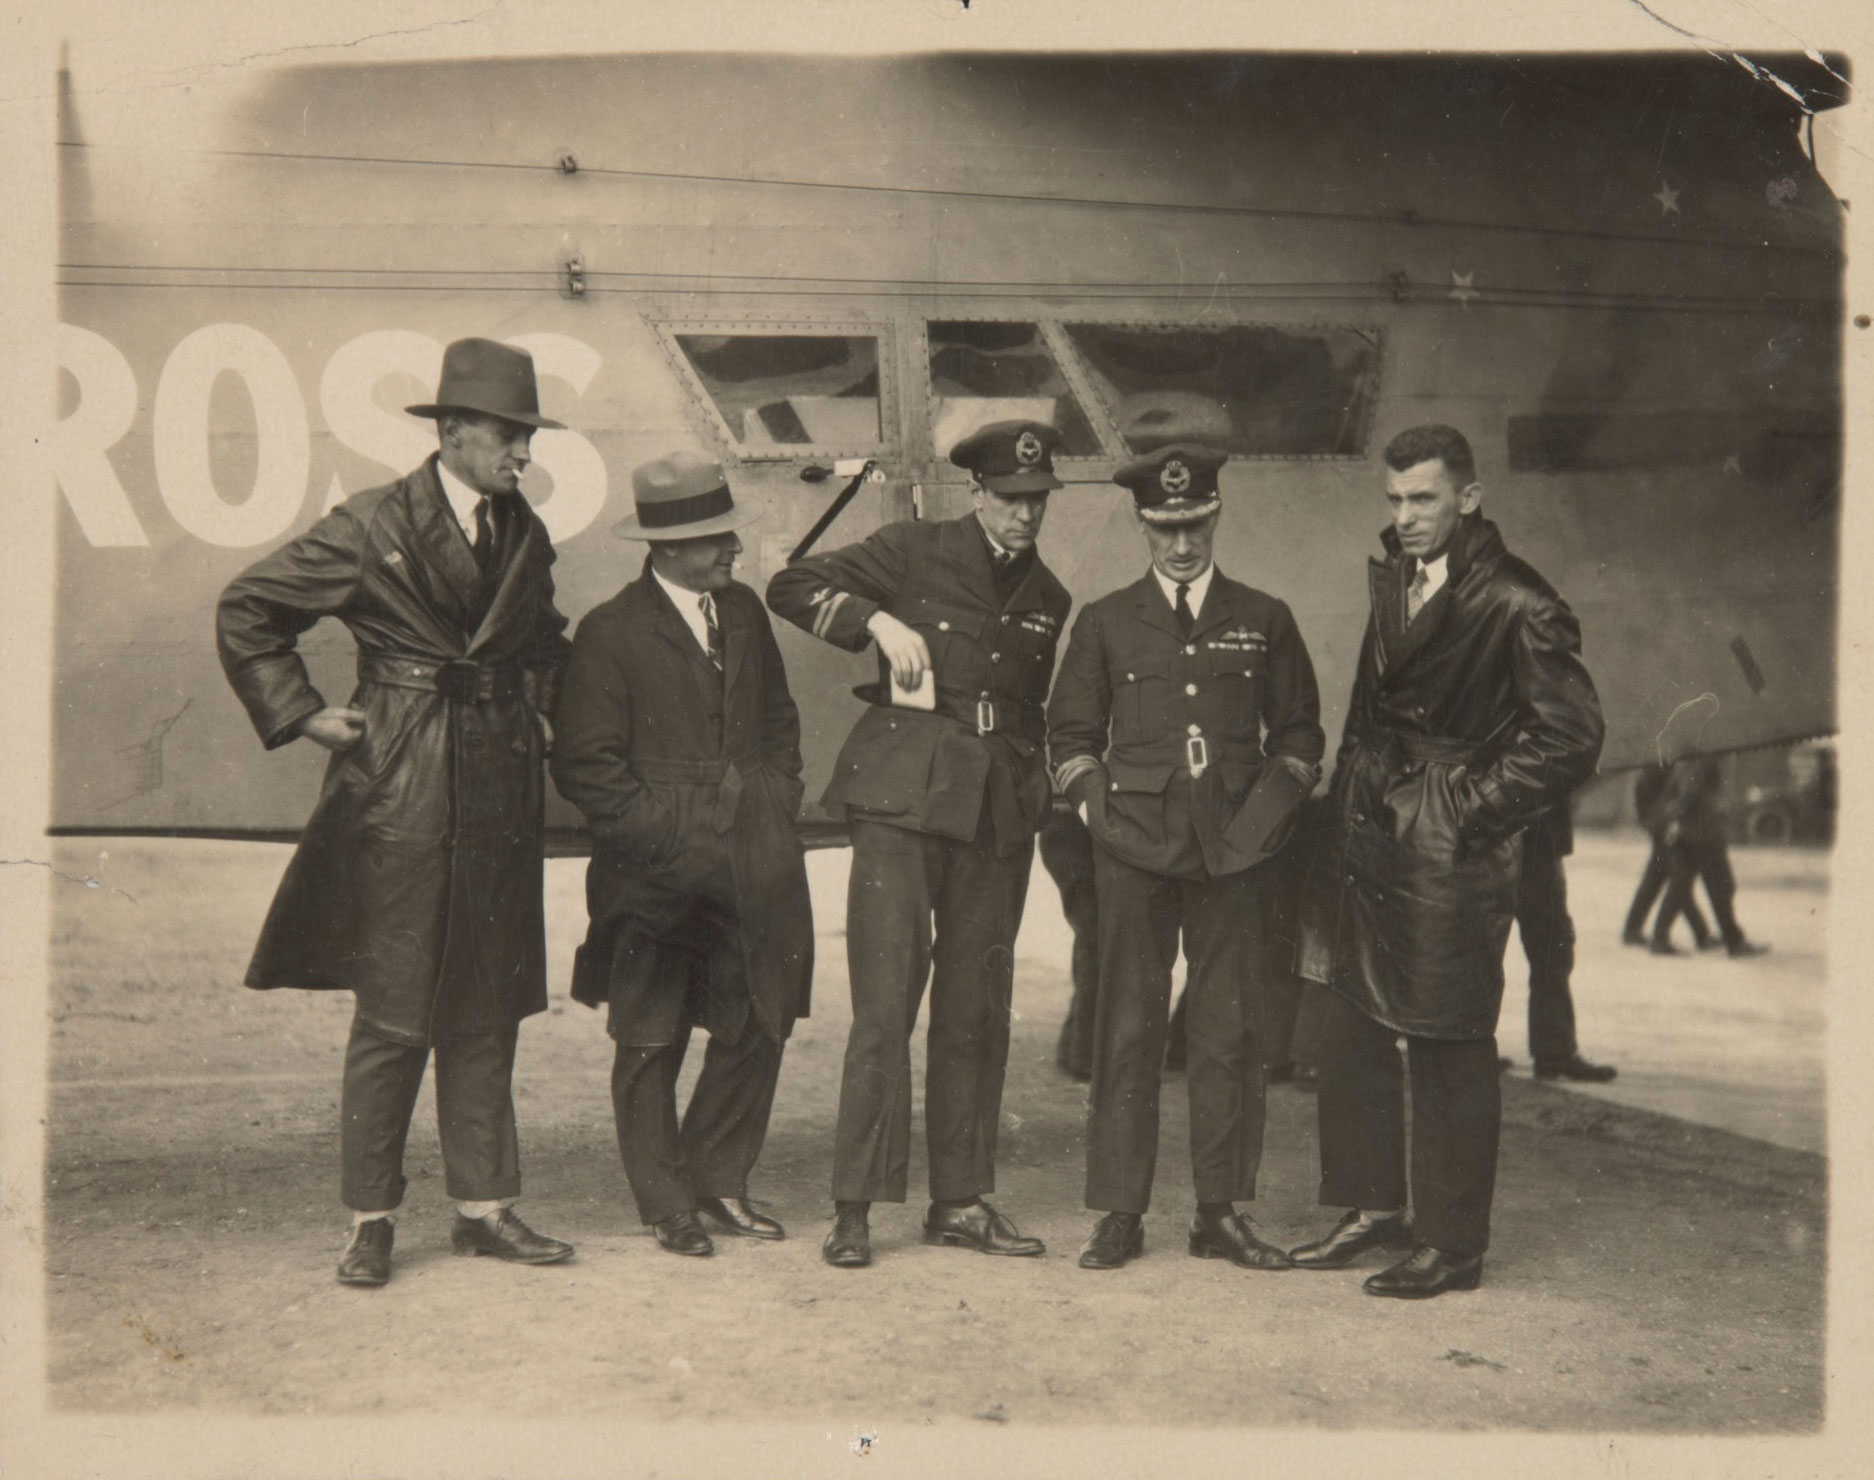 Harold Litchfield, Dr CC Maidment, Charles Ulm, Charles Kingsford Smith and Tom McWilliams